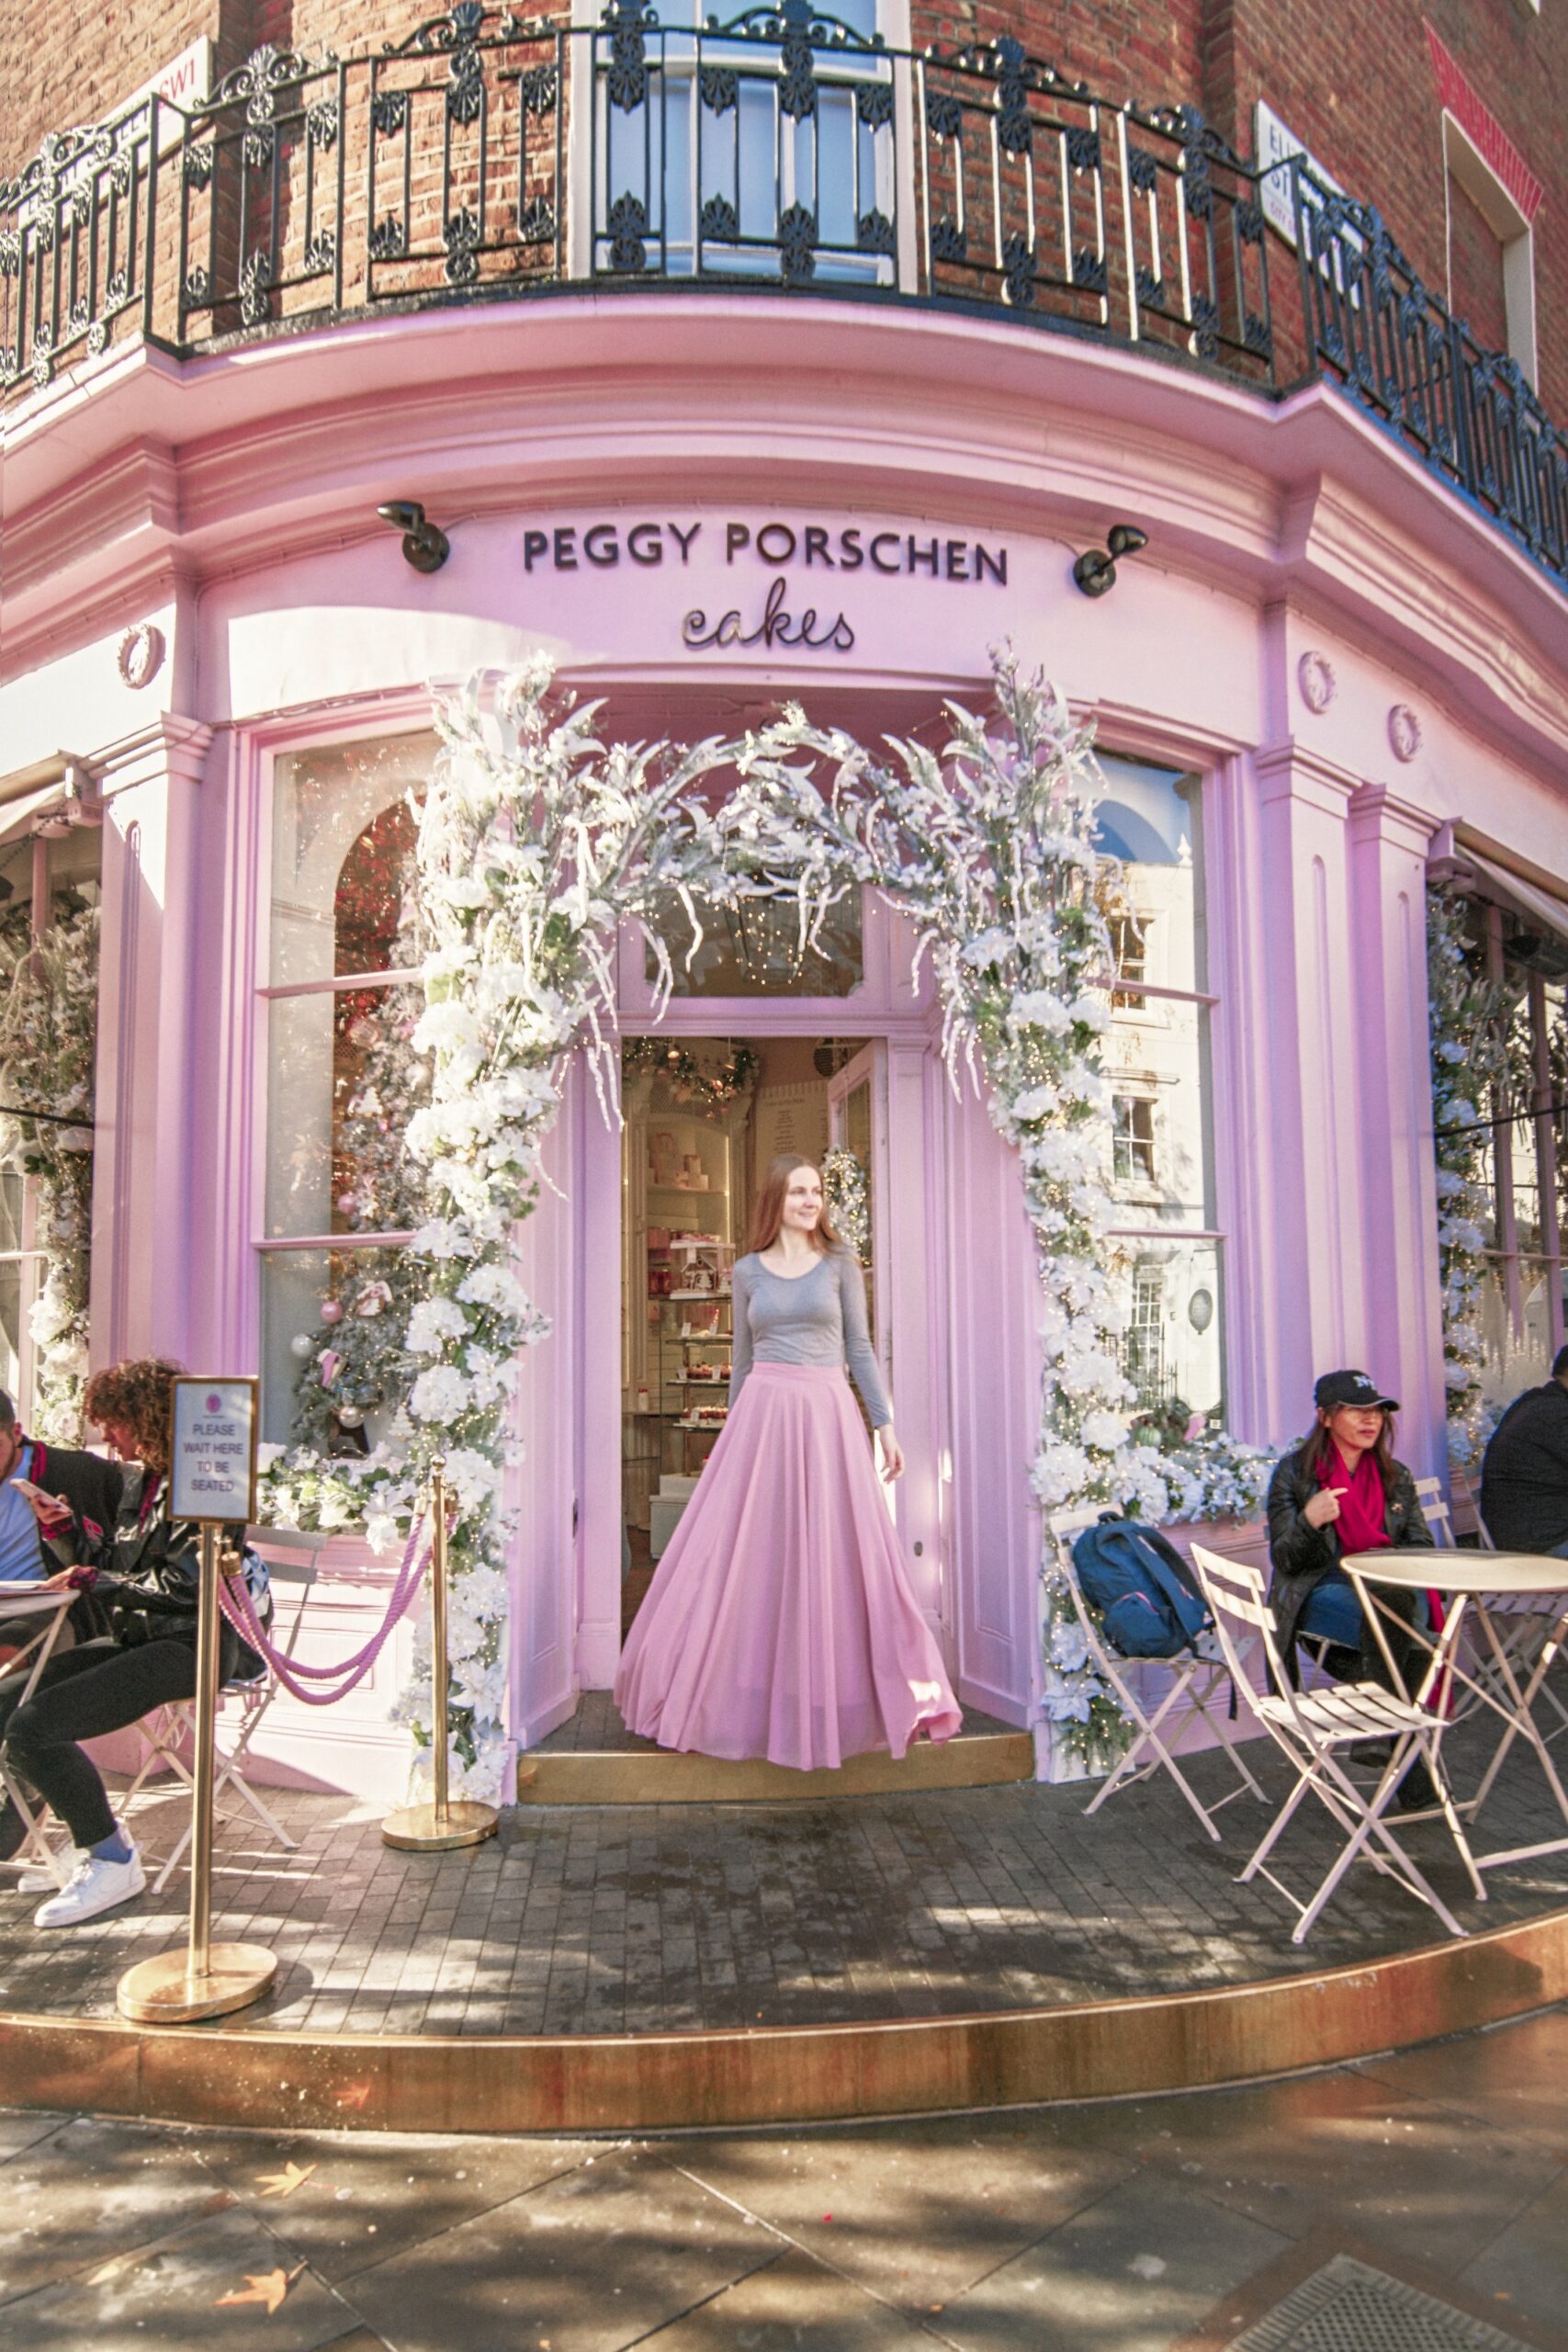 a girl in pink outisde sweets shop in London